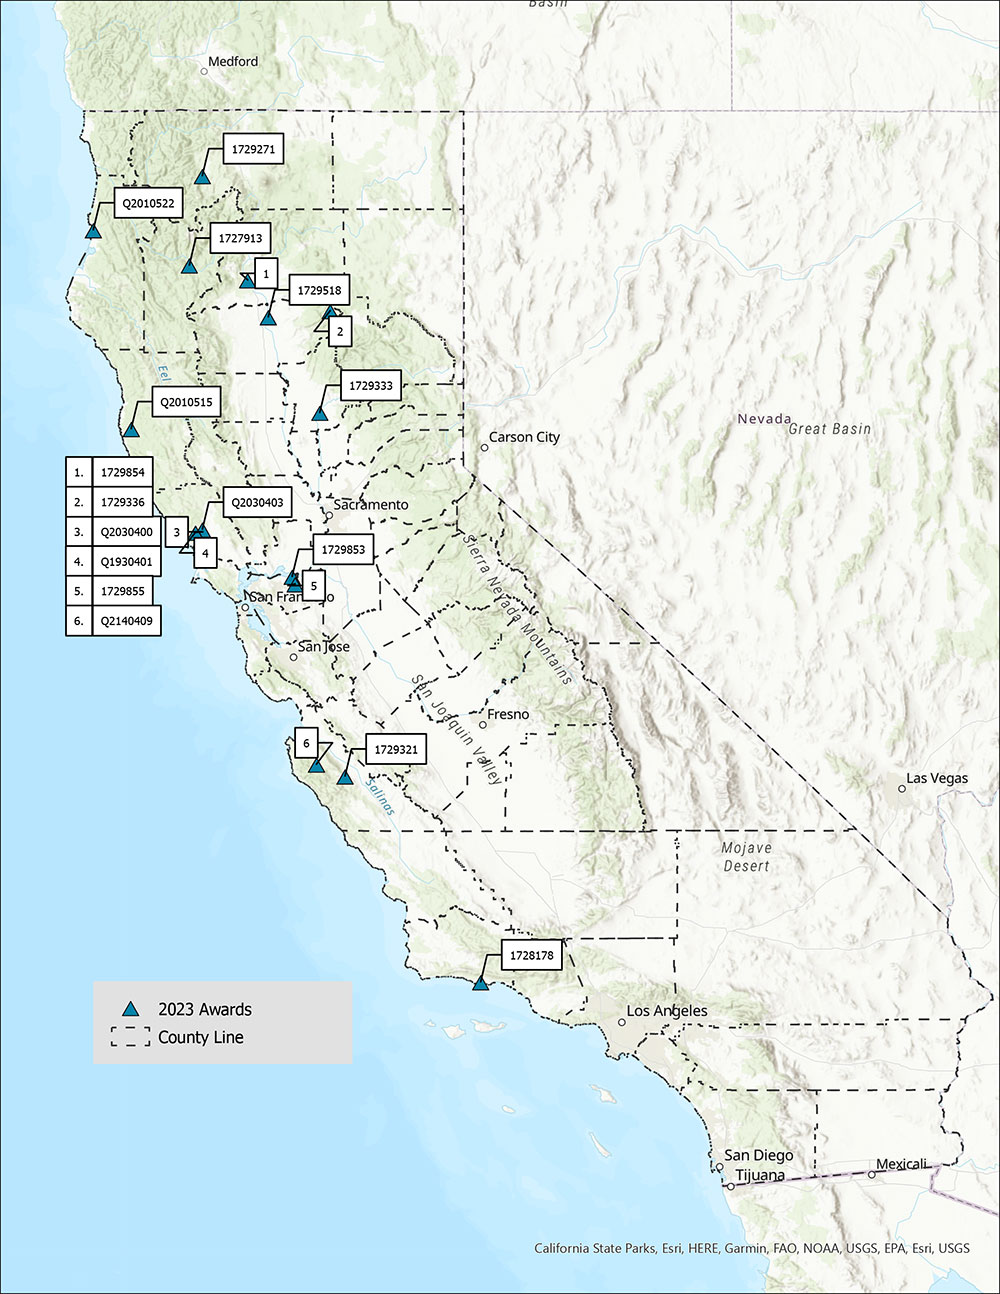 Map of California with points showing the locations of 16 projects awarded grant funding.